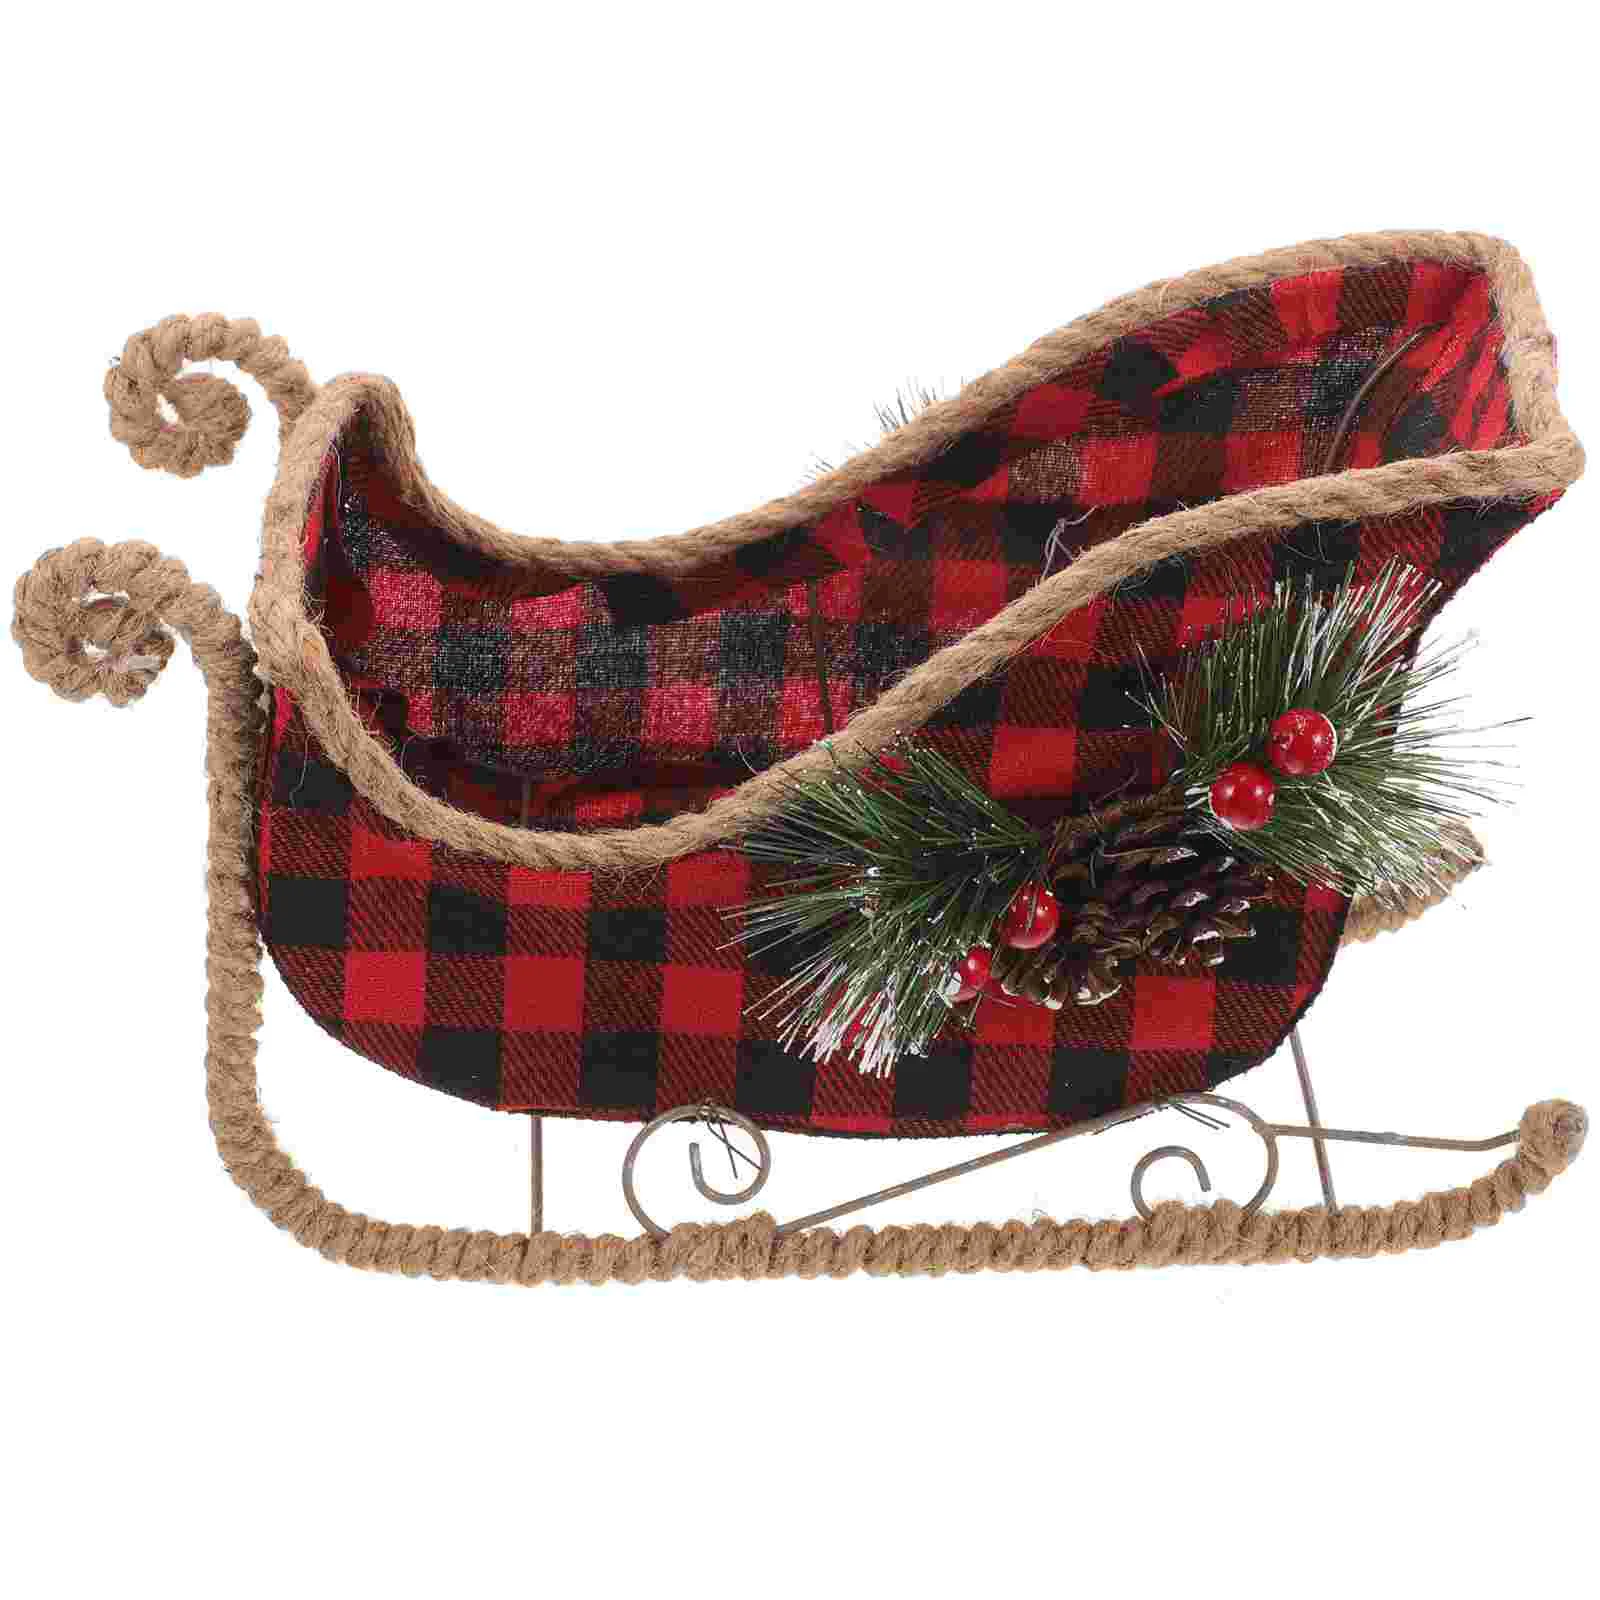 

Christmas Sleigh Ornament Decoration Pine Cones Table Top Decor Empty Baskets Holiday Supplies